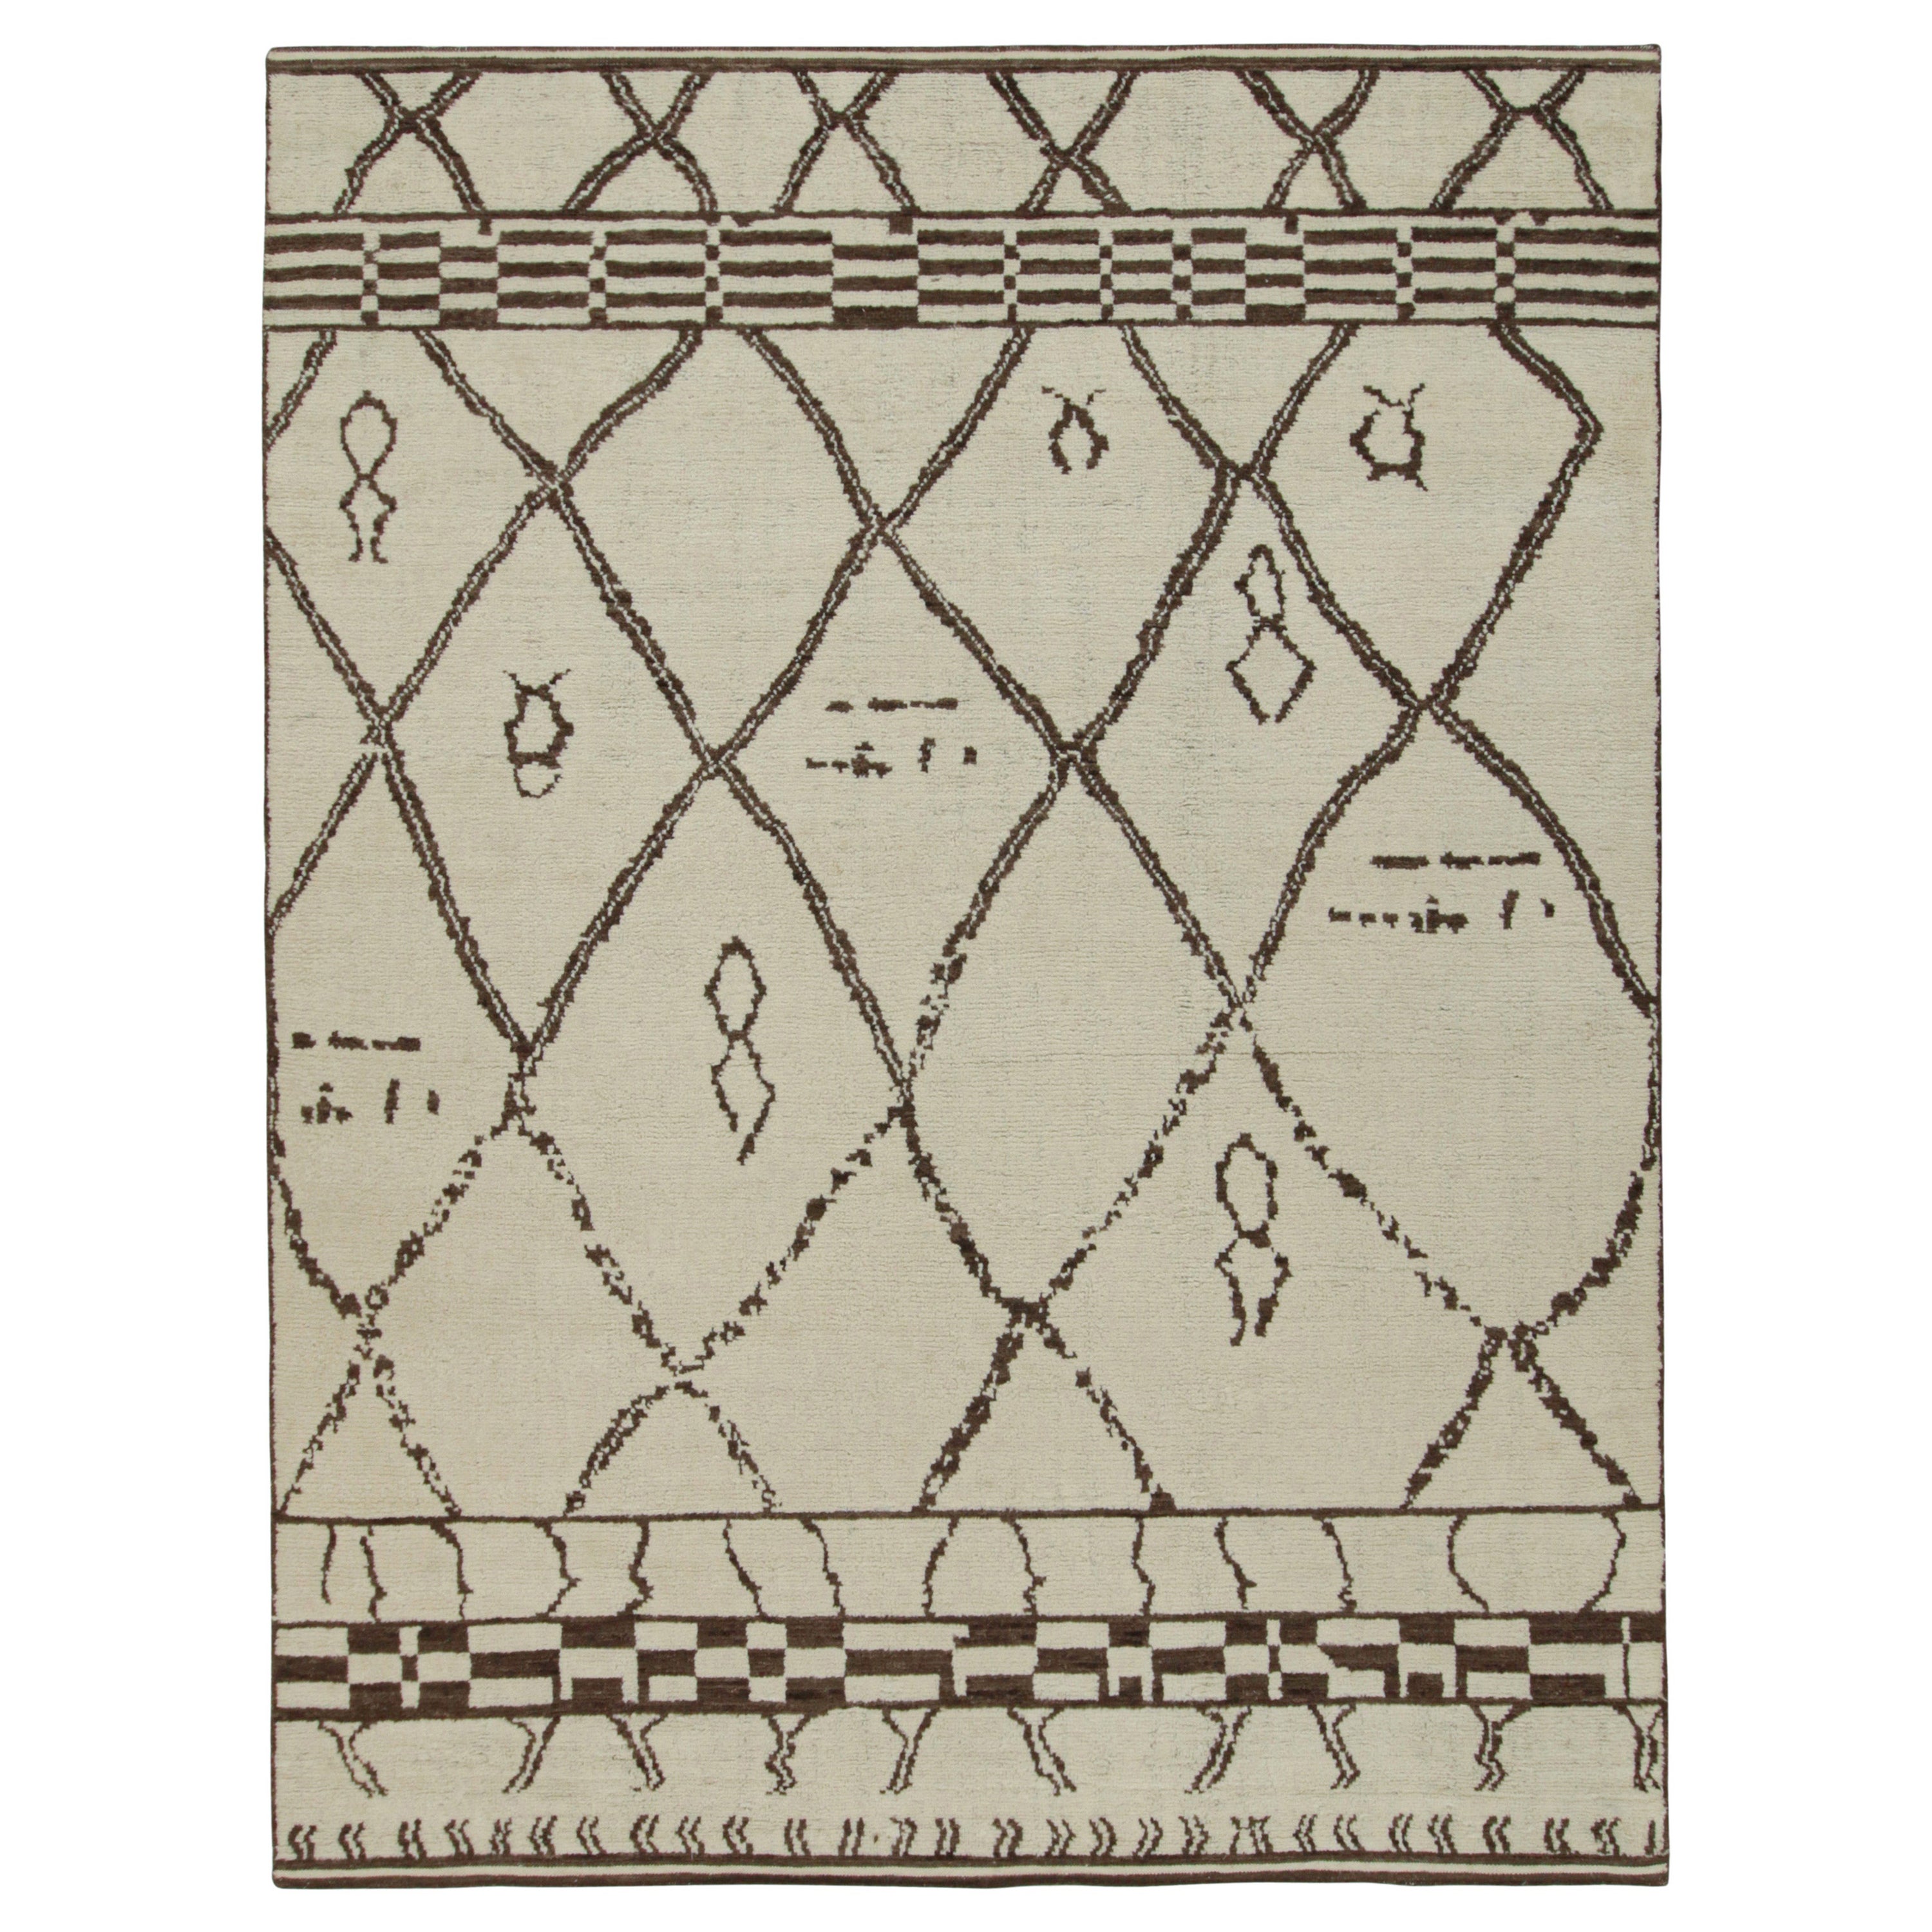 Rug & Kilim’s Moroccan Style Rug in Off-White with Brown Geometric Pattern